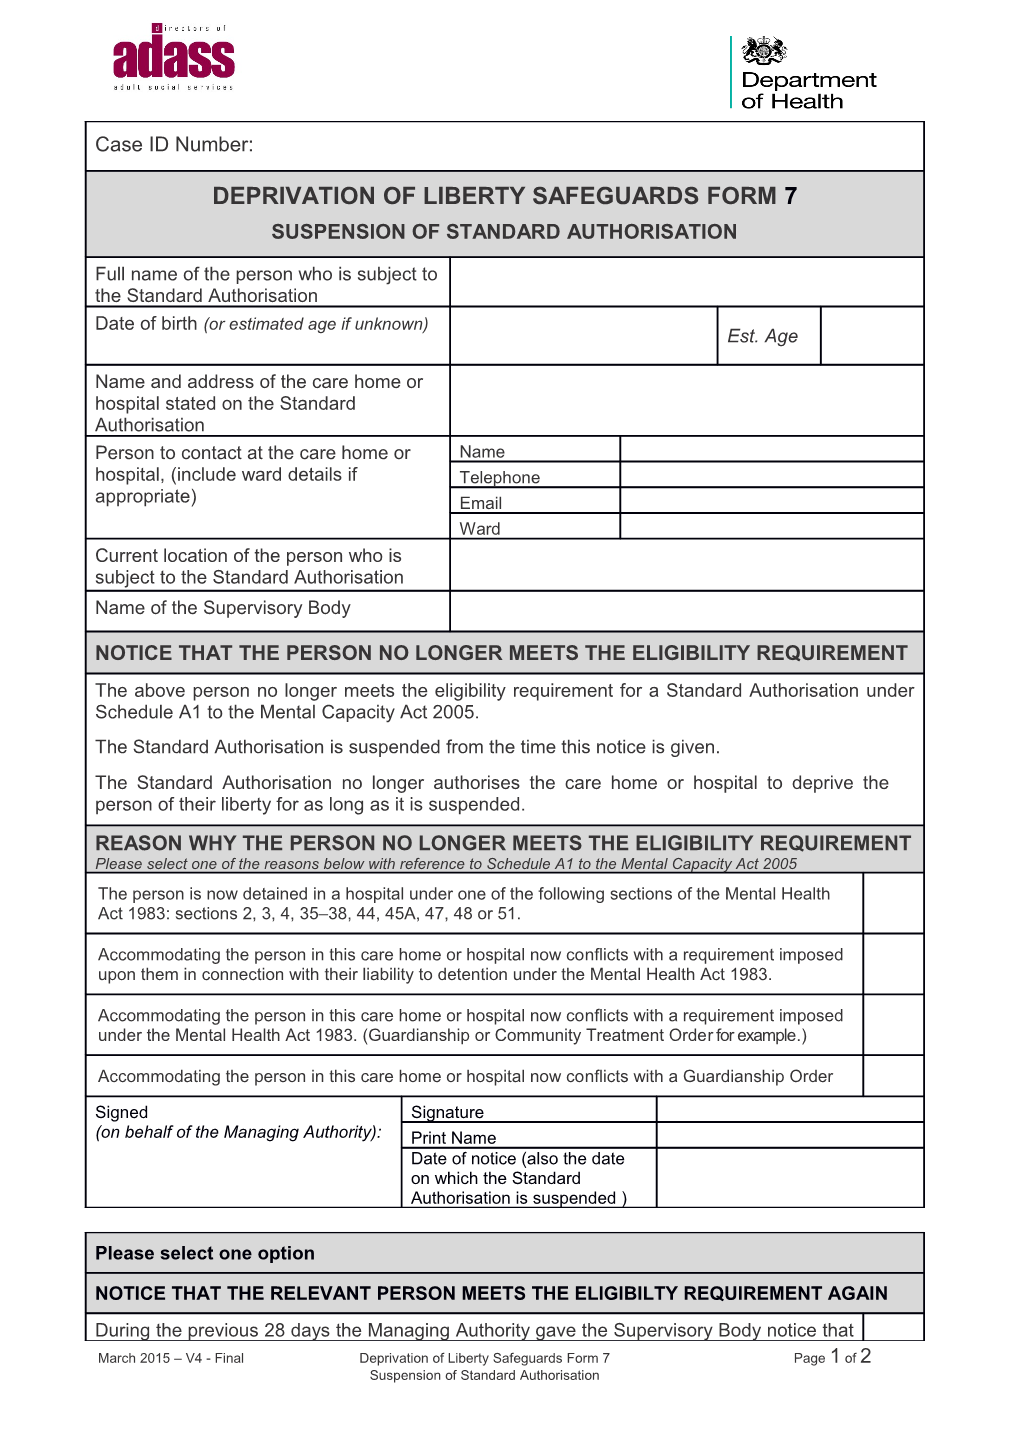 March 2015 V4 - Finaldeprivation of Liberty Safeguards Form 7Page 1 of 2